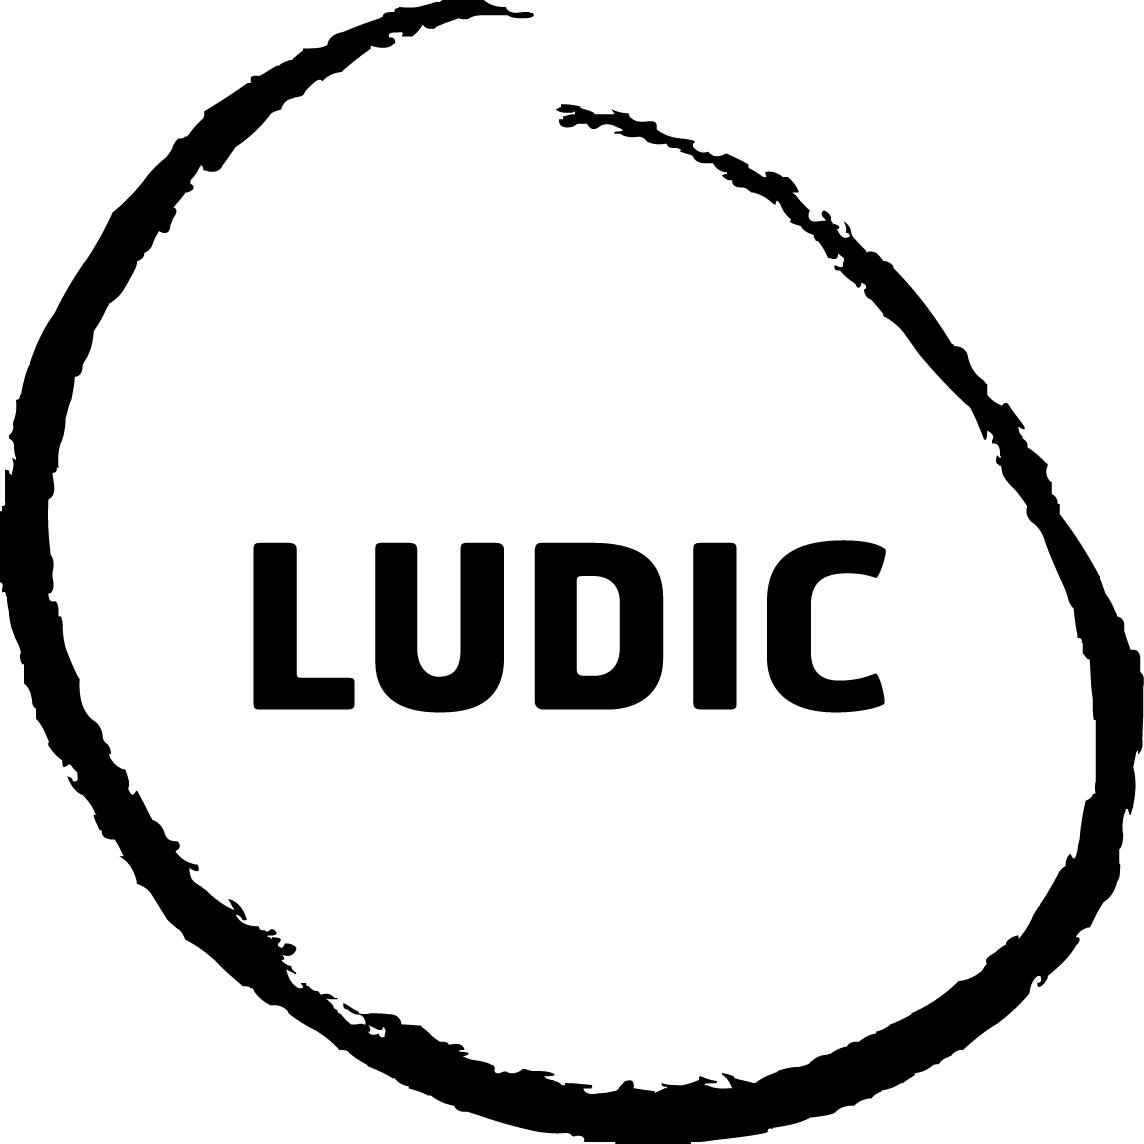 LUDIC_LOGO_BLACK_new Strategy Implementation, People Engagement, Capability Building - Ludic Consulting